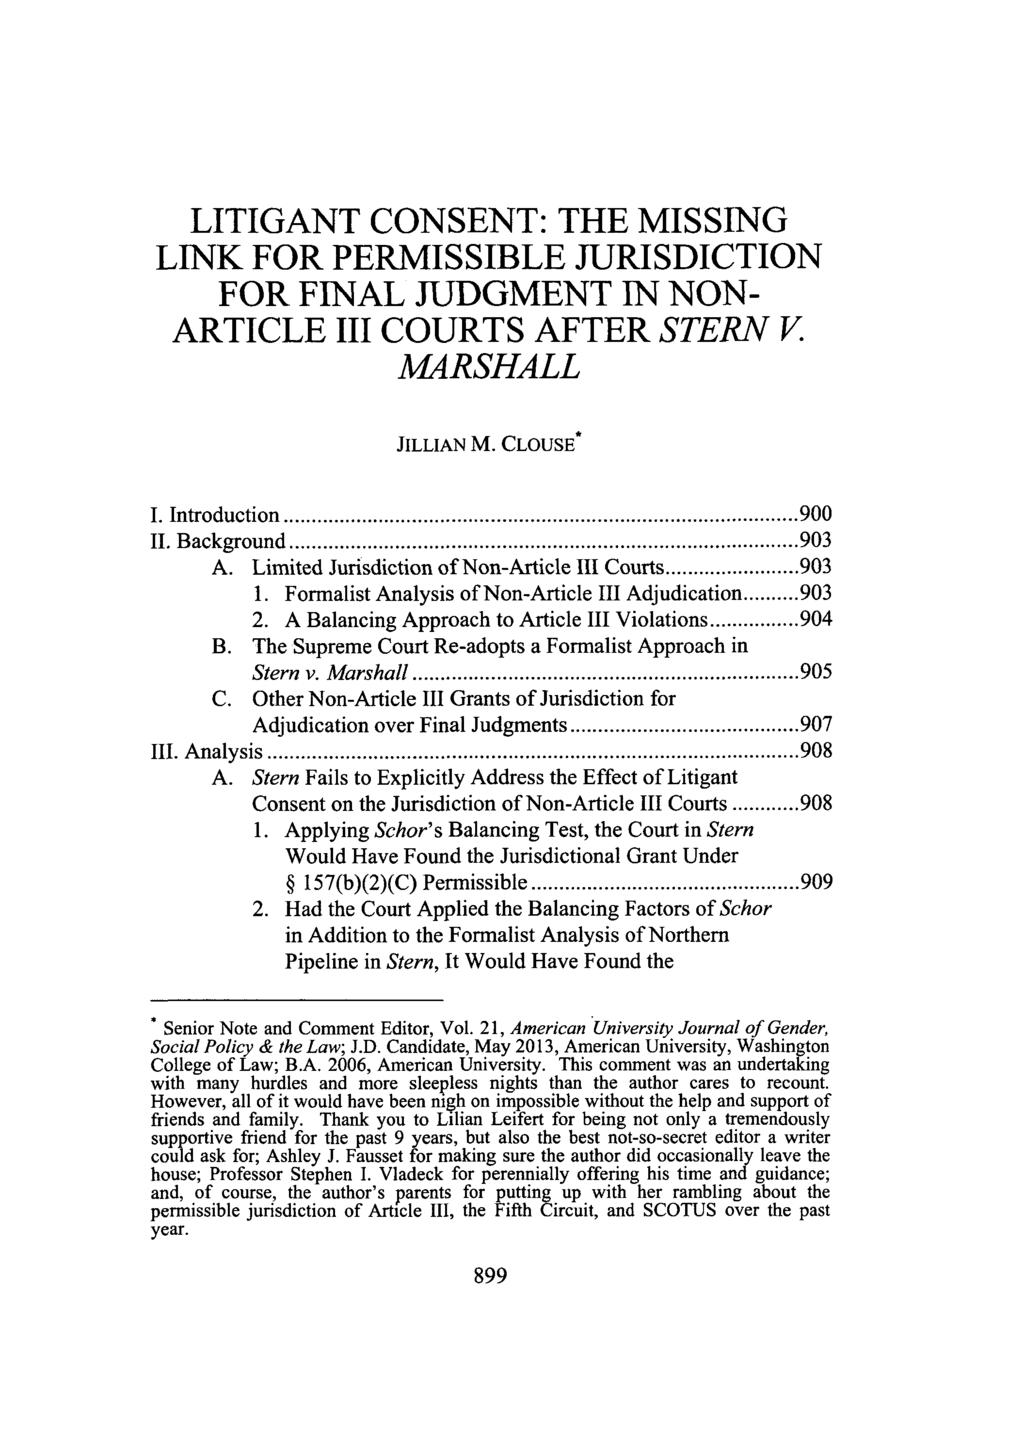 Clouse: Litigant Consent: The Missing Link for Permissible Jurisdiction f LITIGANT CONSENT: THE MISSING LINK FOR PERMISSIBLE JURISDICTION FOR FINAL JUDGMENT IN NON- ARTICLE III COURTS AFTER STERN V.